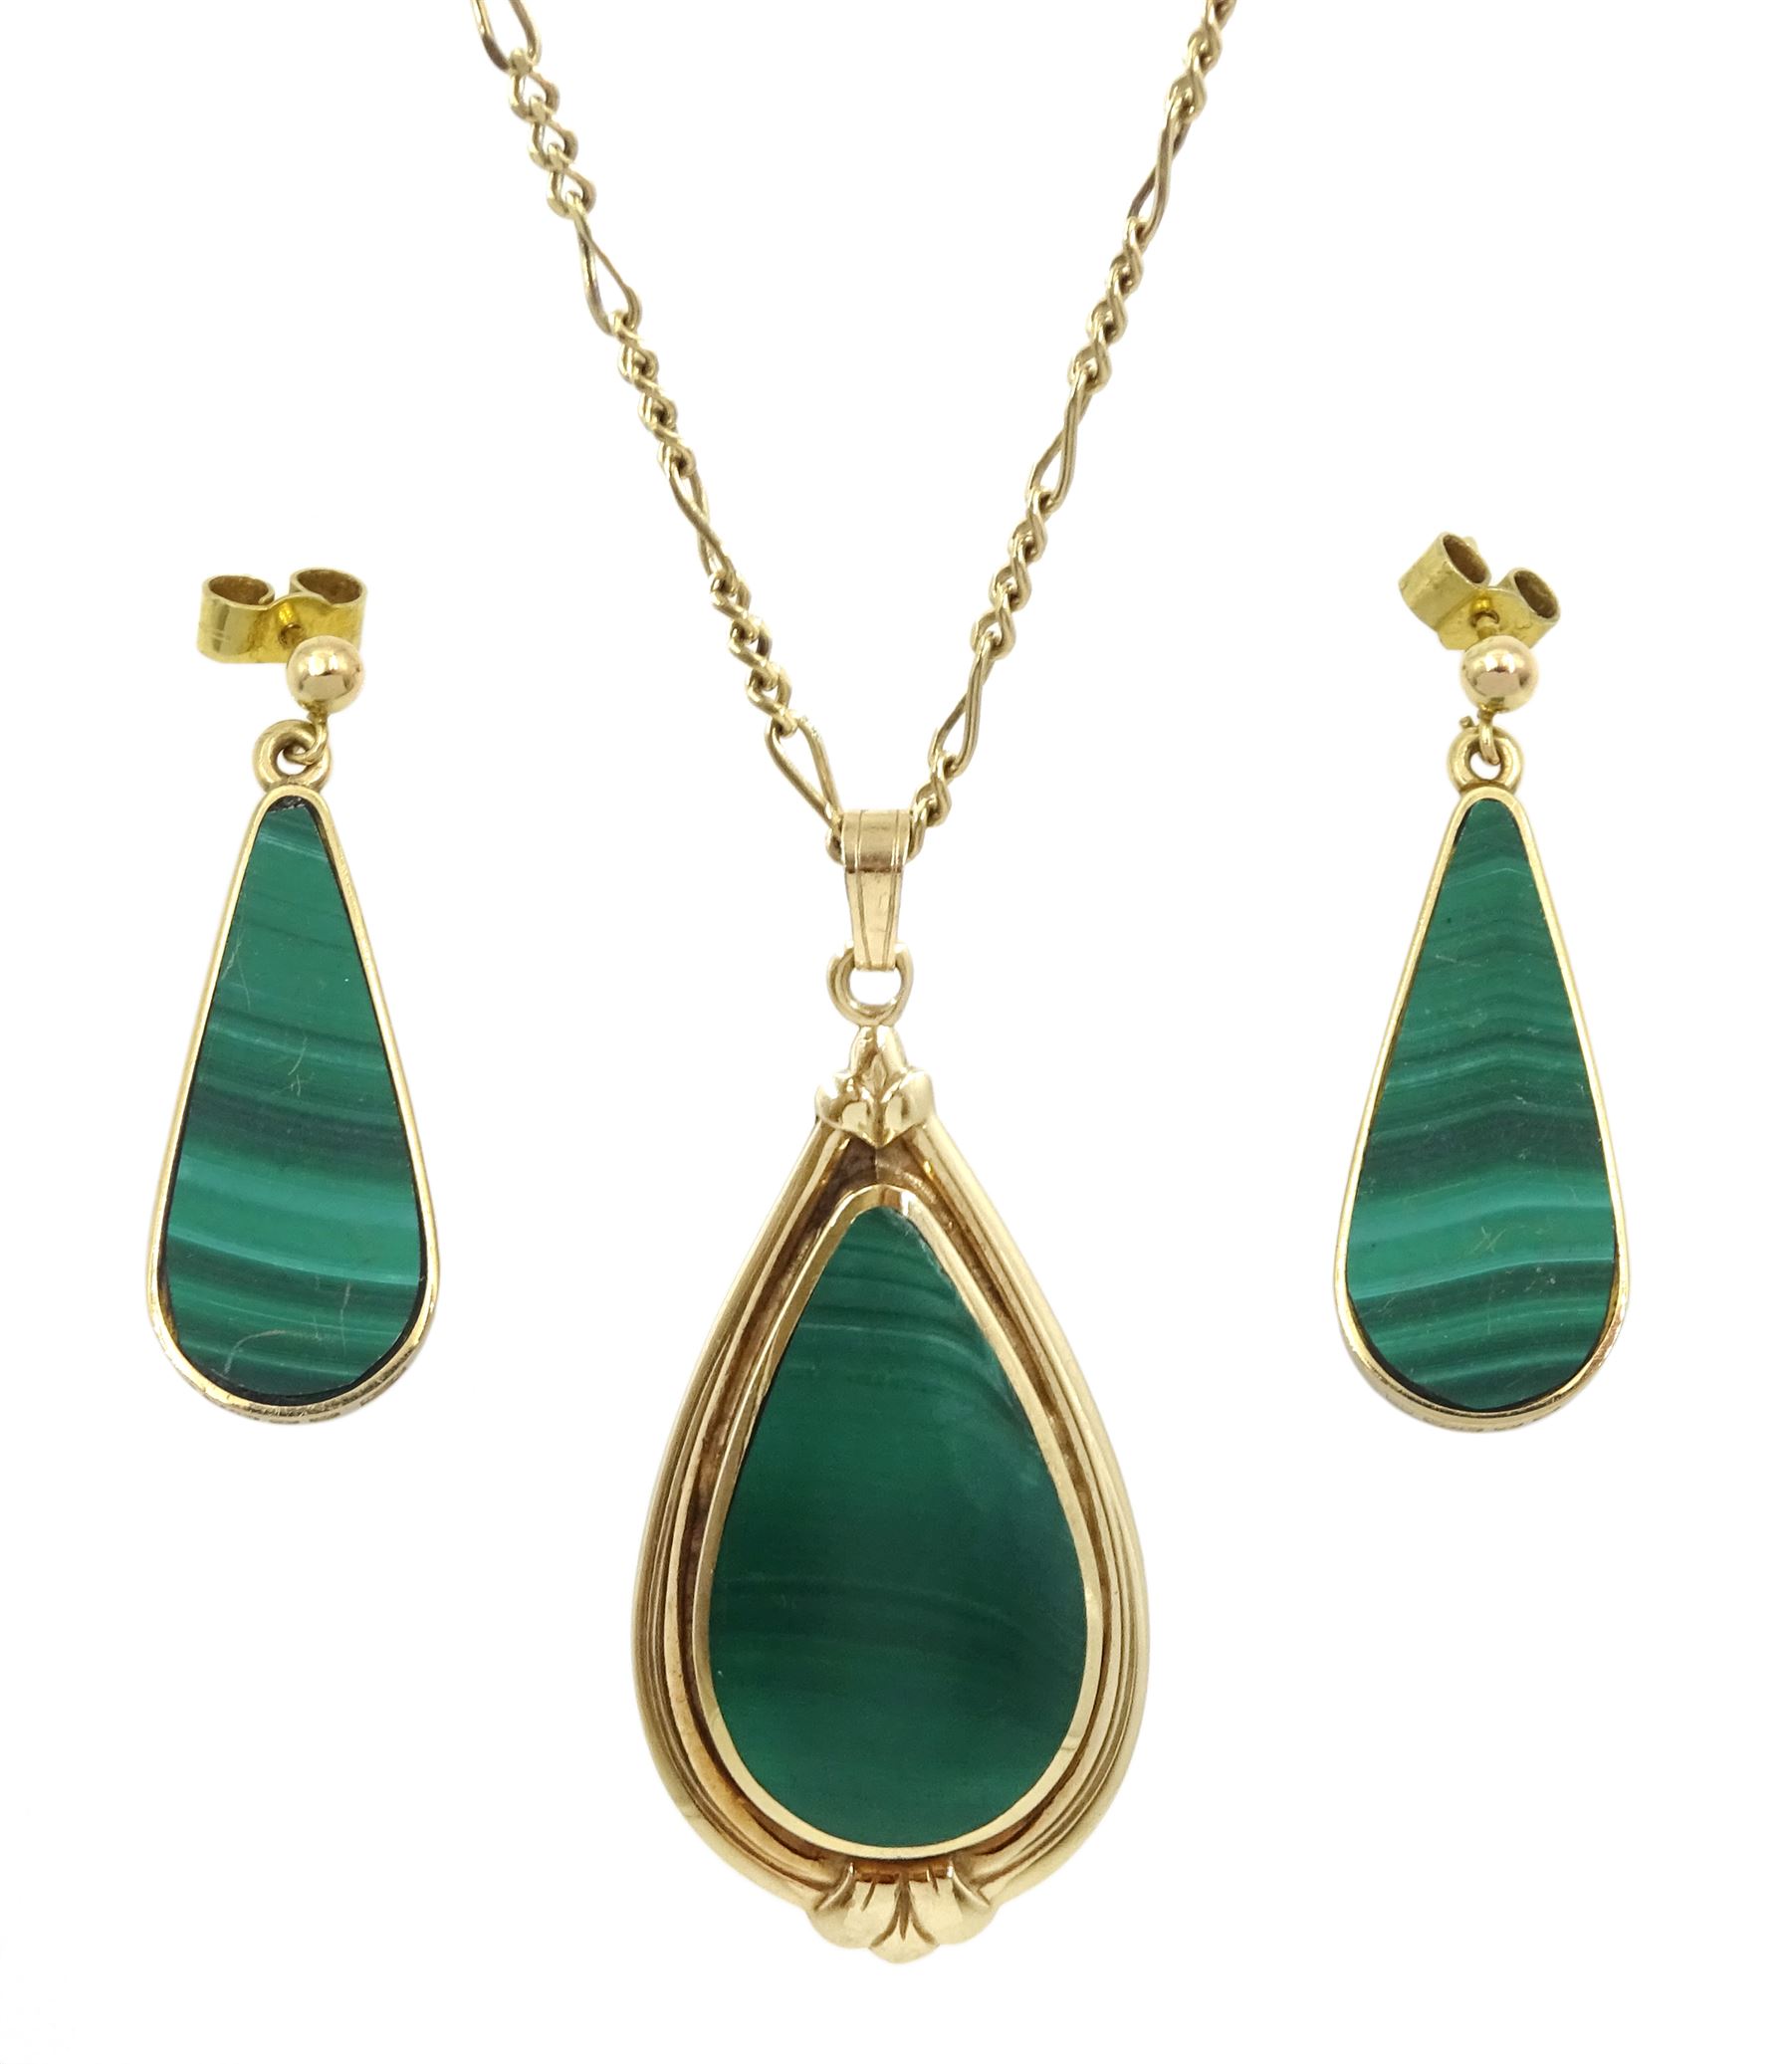 Gold pear shaped malachite pendant necklace and pair of similar gold stud earrings